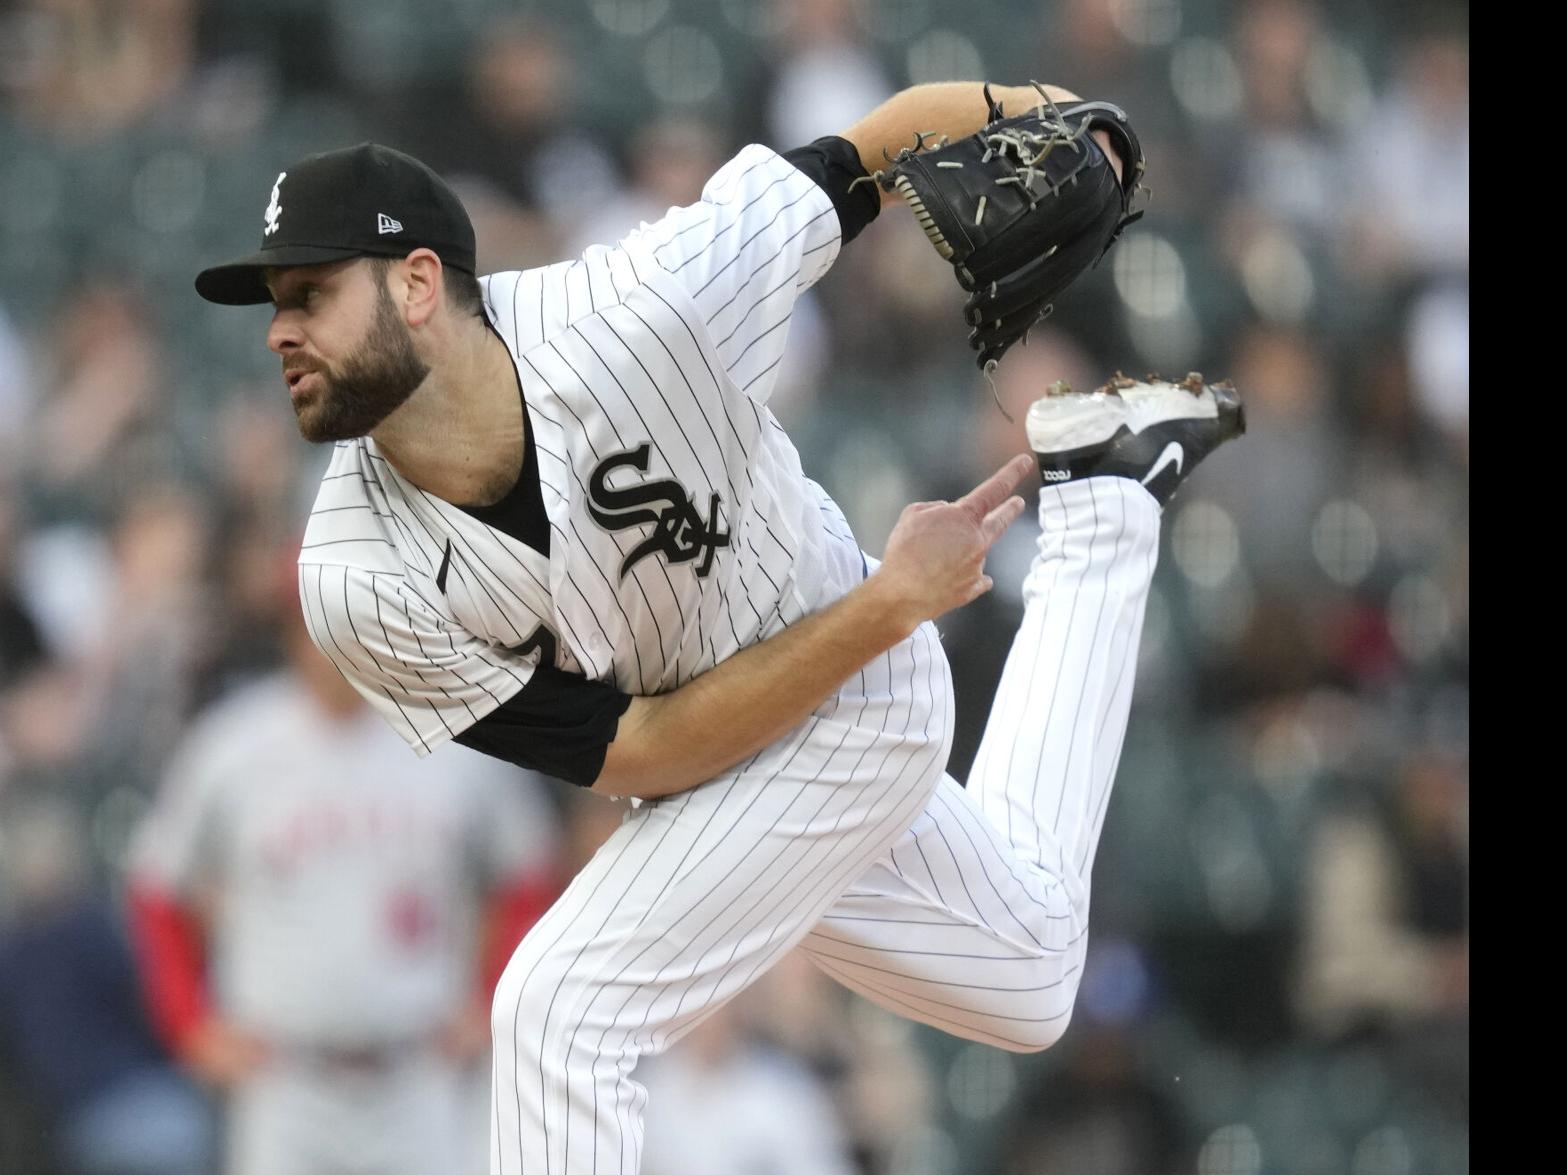 White Sox pitcher Lucas Giolito splits from wife files during All-Star Week